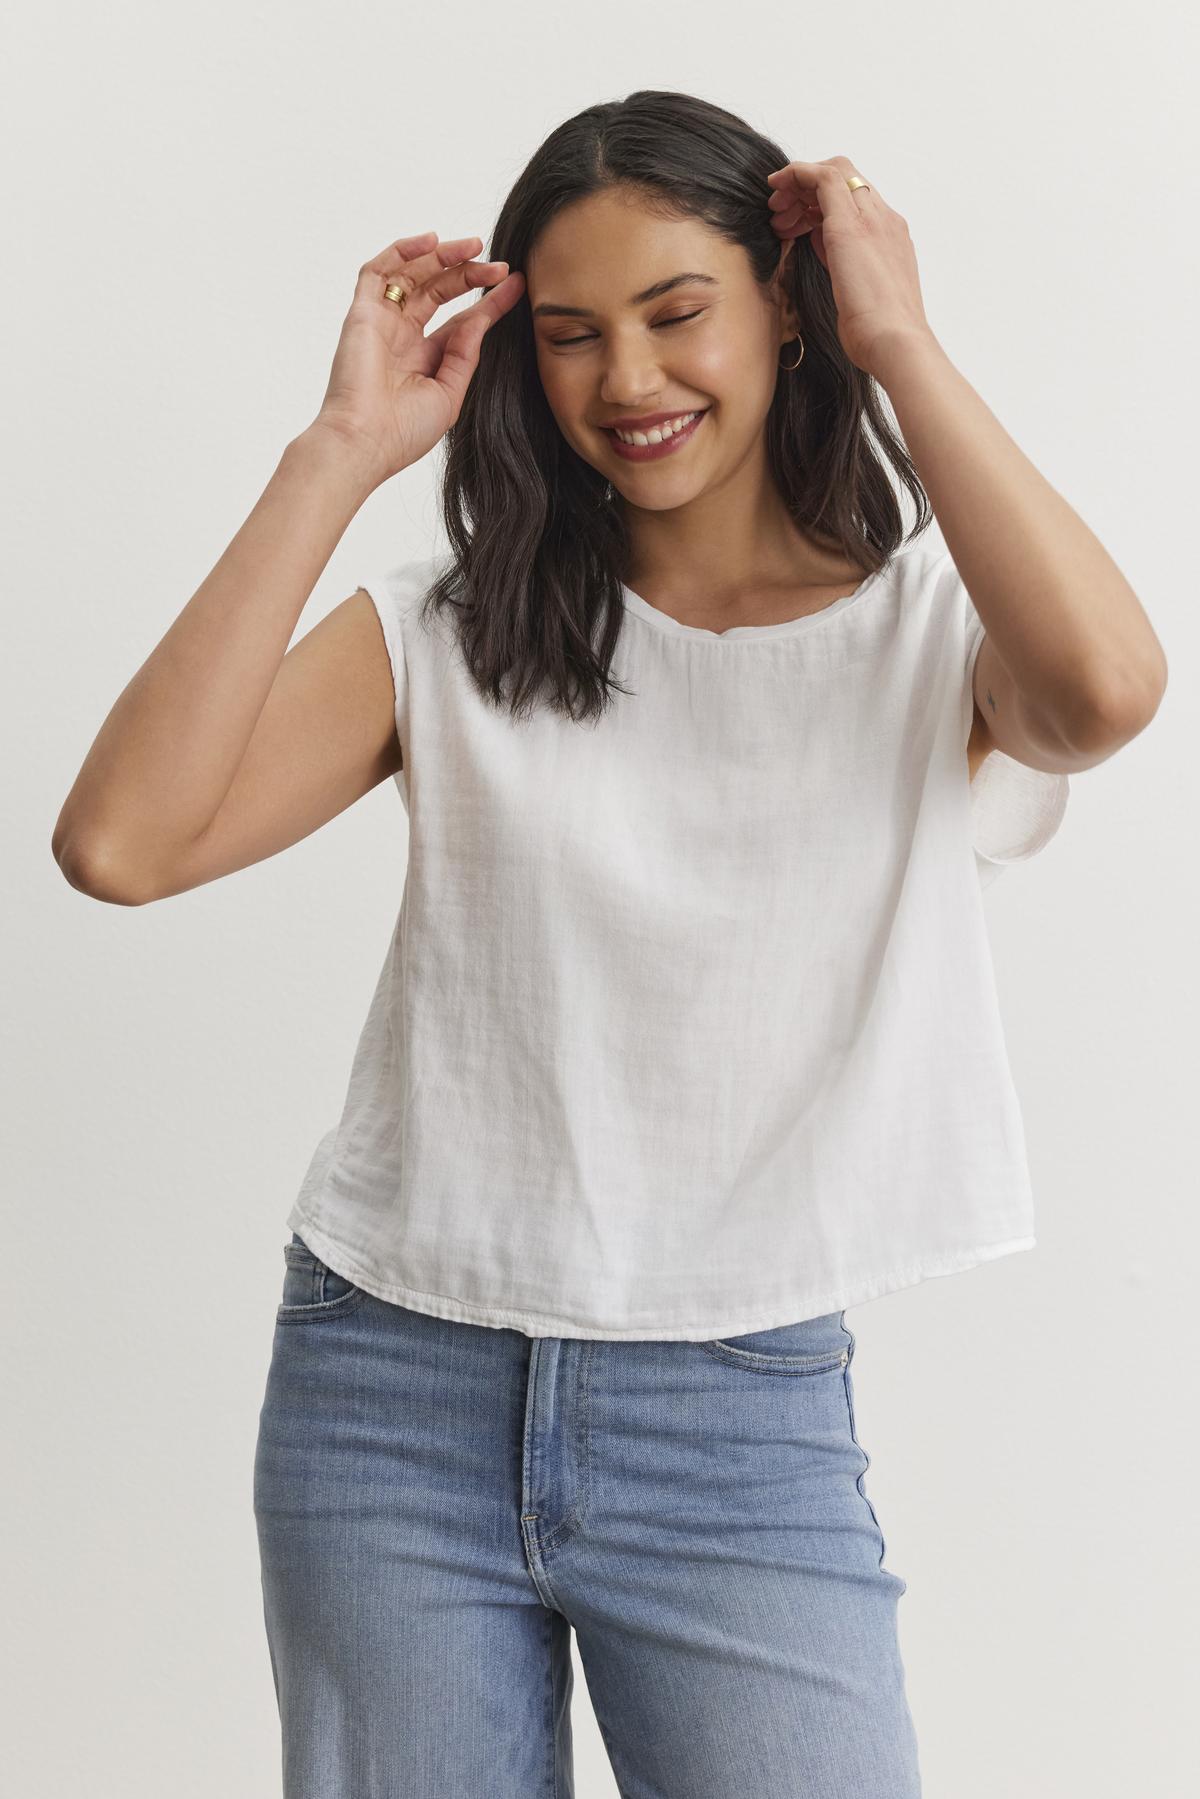 A person with long dark hair smiles while adjusting their hair, wearing a white sleeveless top and blue jeans against a plain white background. The casual basic outfit features the DANIELLA CREW NECK TEE by Velvet by Graham & Spencer, made from a lightweight cotton woven fabric that's perfect for everyday wear.-37074420891841